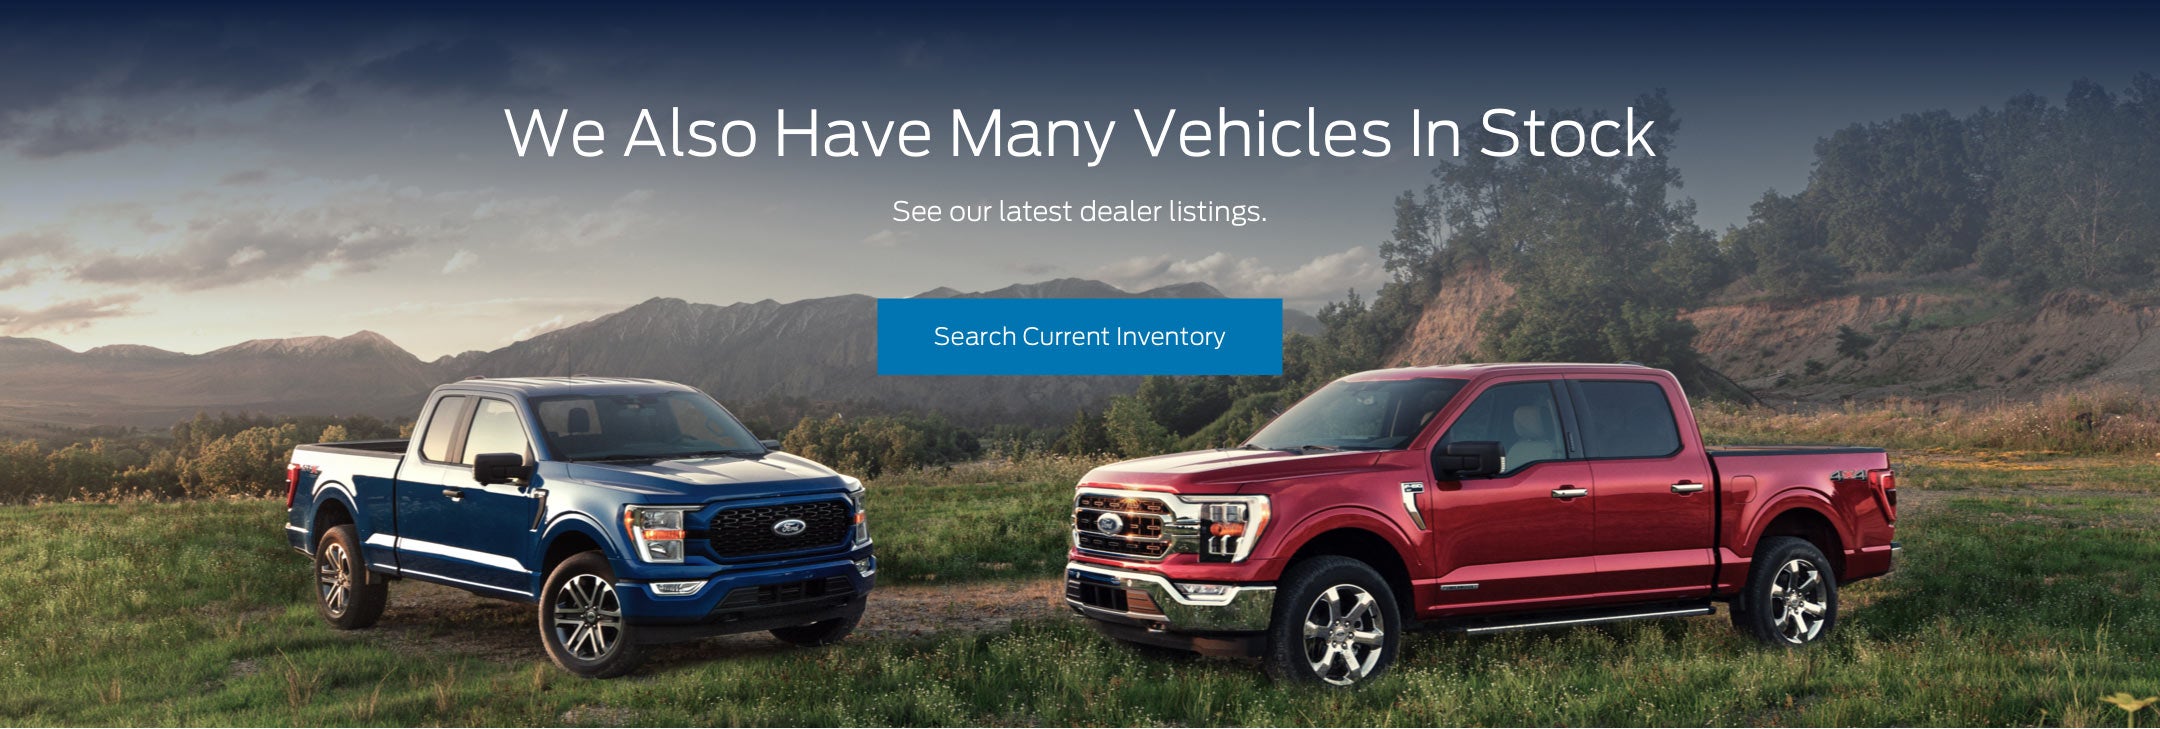 Ford vehicles in stock | Ken Ganley Ford in Barberton OH